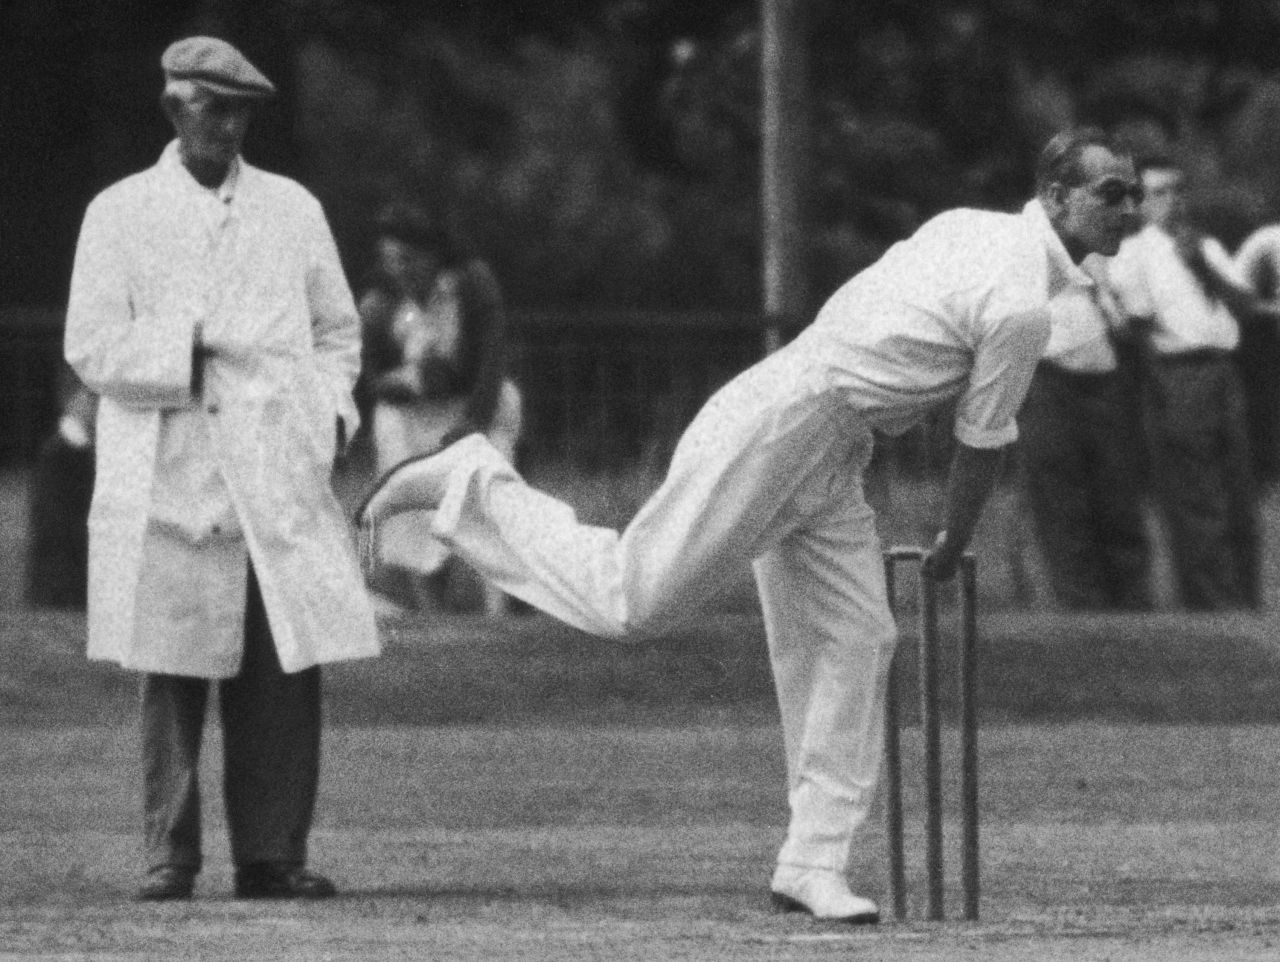 Prince Philip plays in a village cricket match in July 1949.